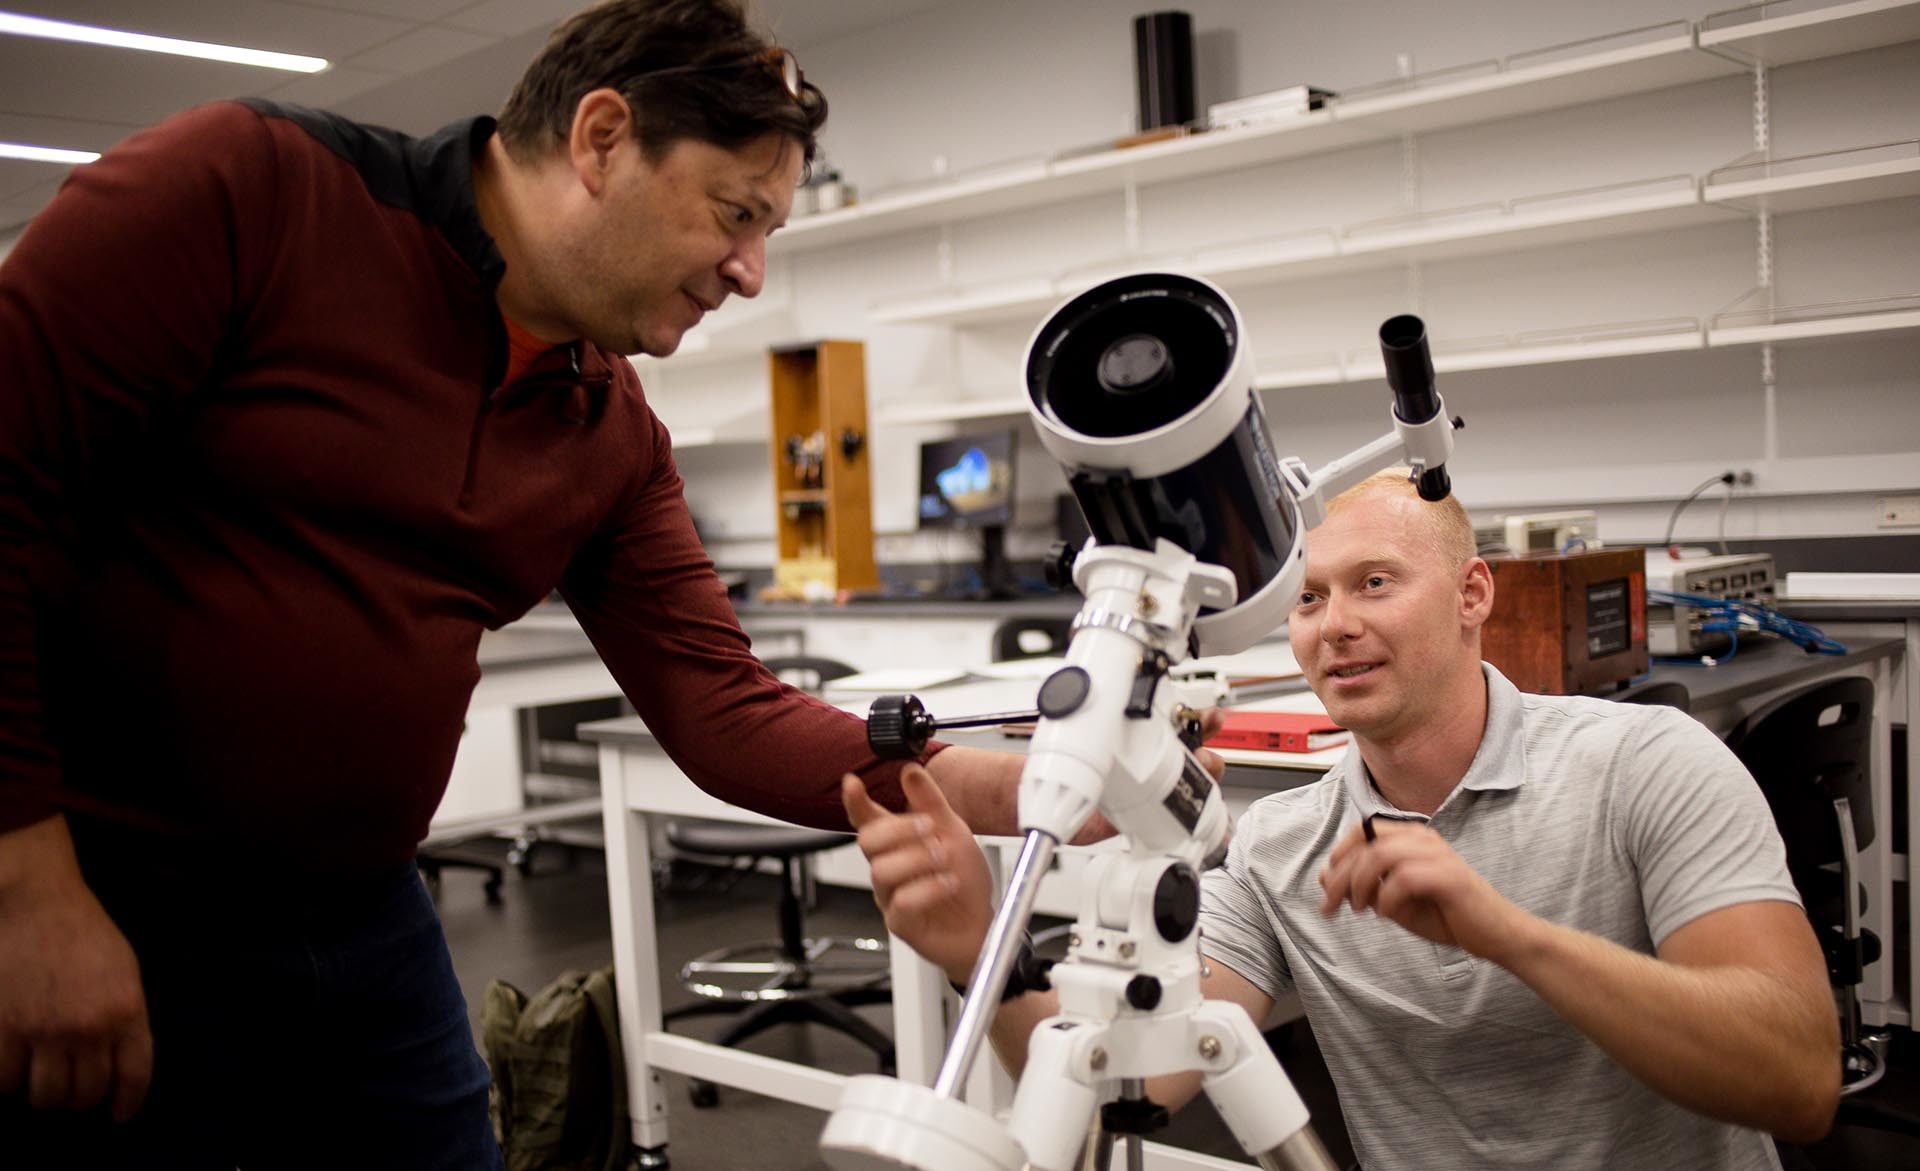 Professor Grant Denn, left, and student Cody Ward and in the Physics Laboratory with the Celestron Omni XLT 127 Telescope